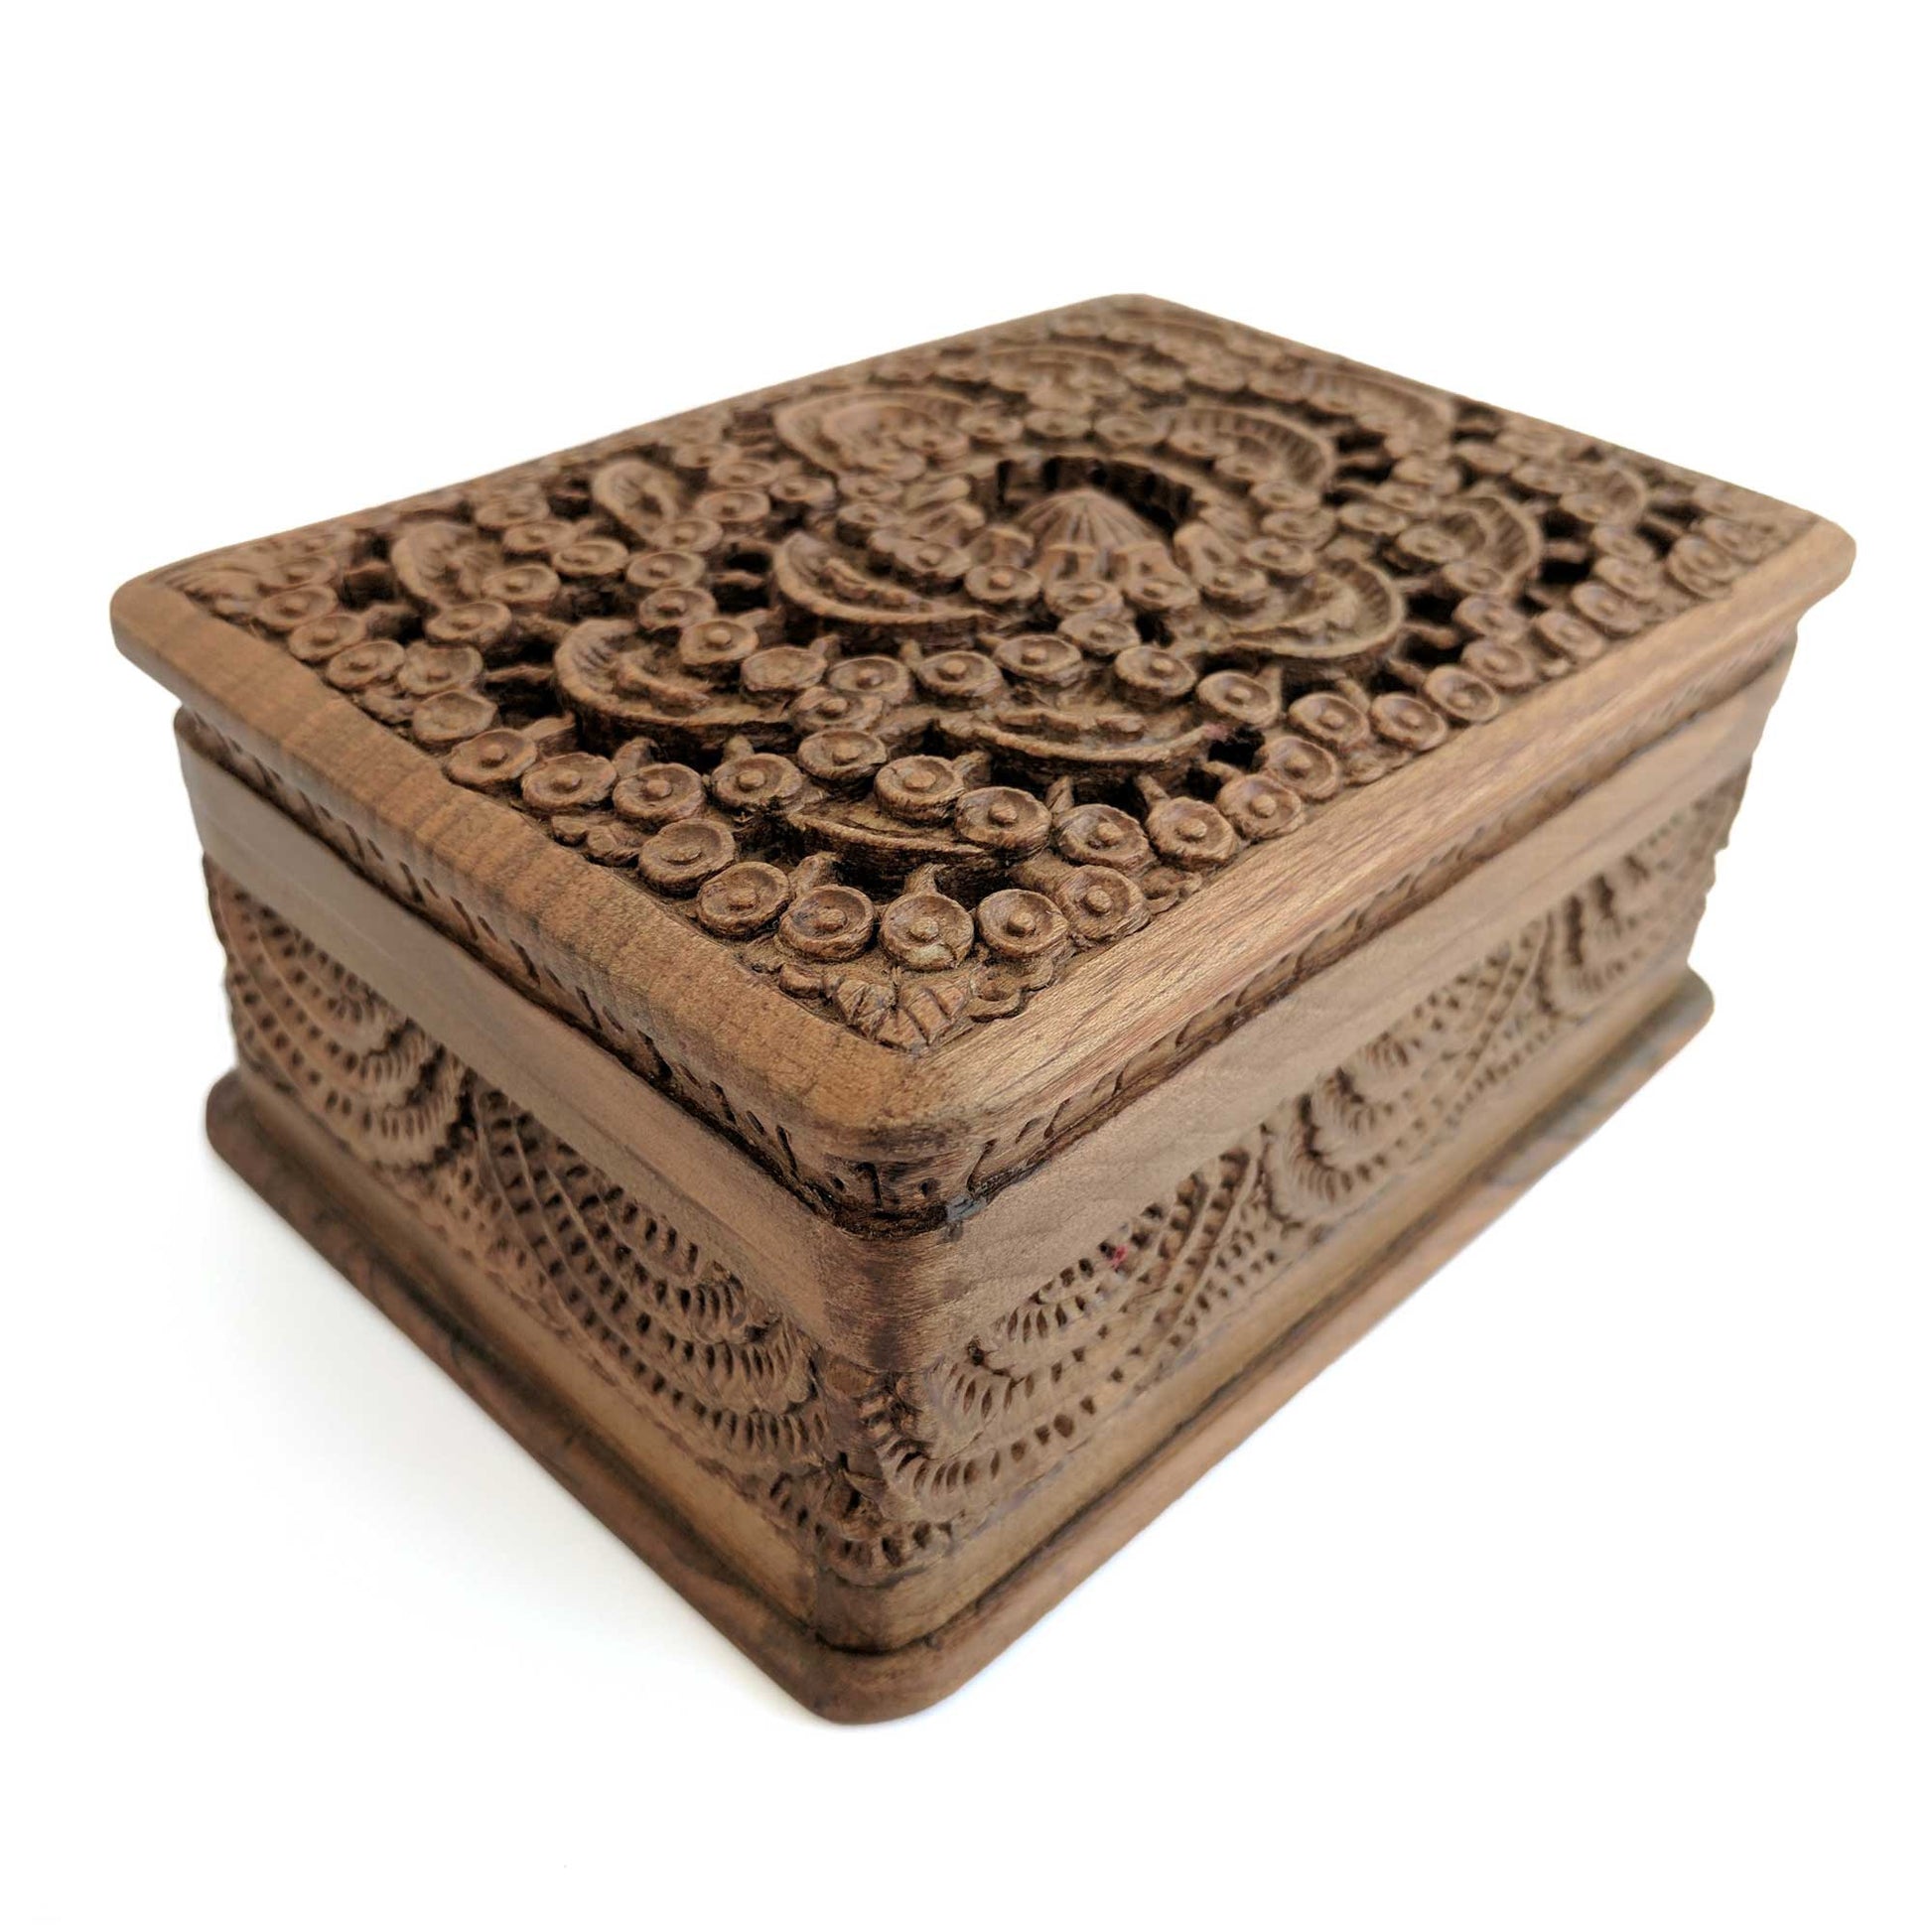 Wooden Secret Box made from Walnut Wood with circular design pattern